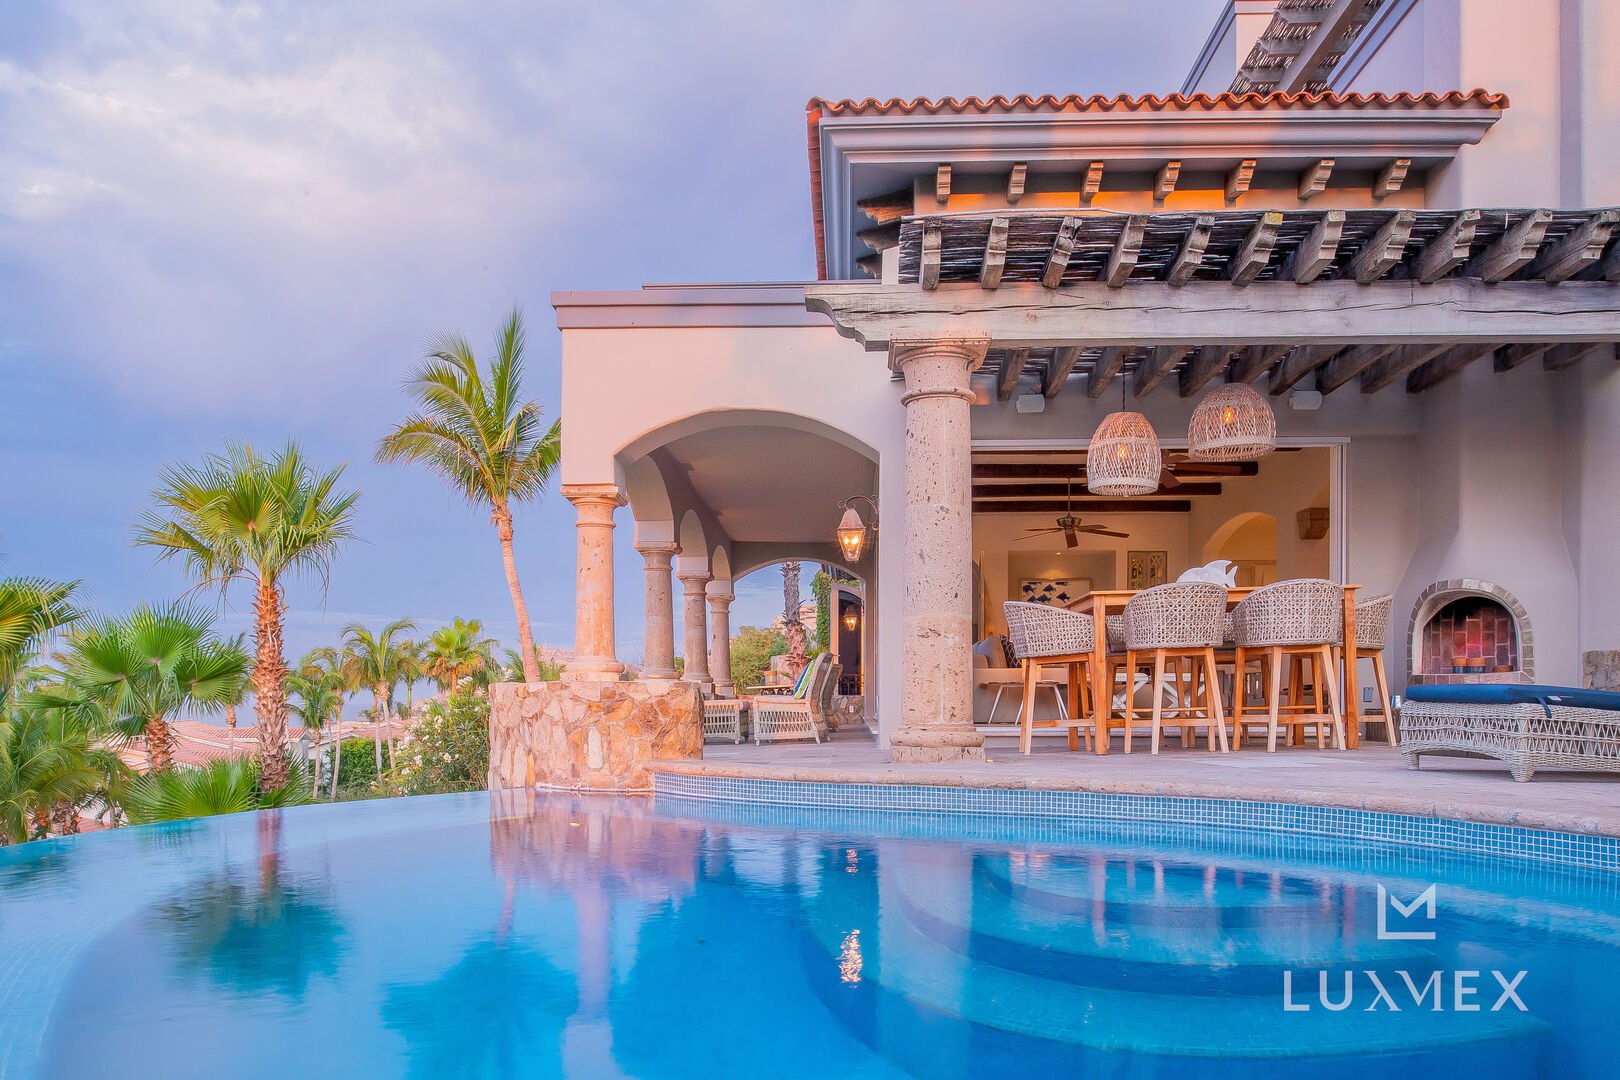 the patio of this Los Cabos Luxury Vacation Villa as seen from inside the pool.